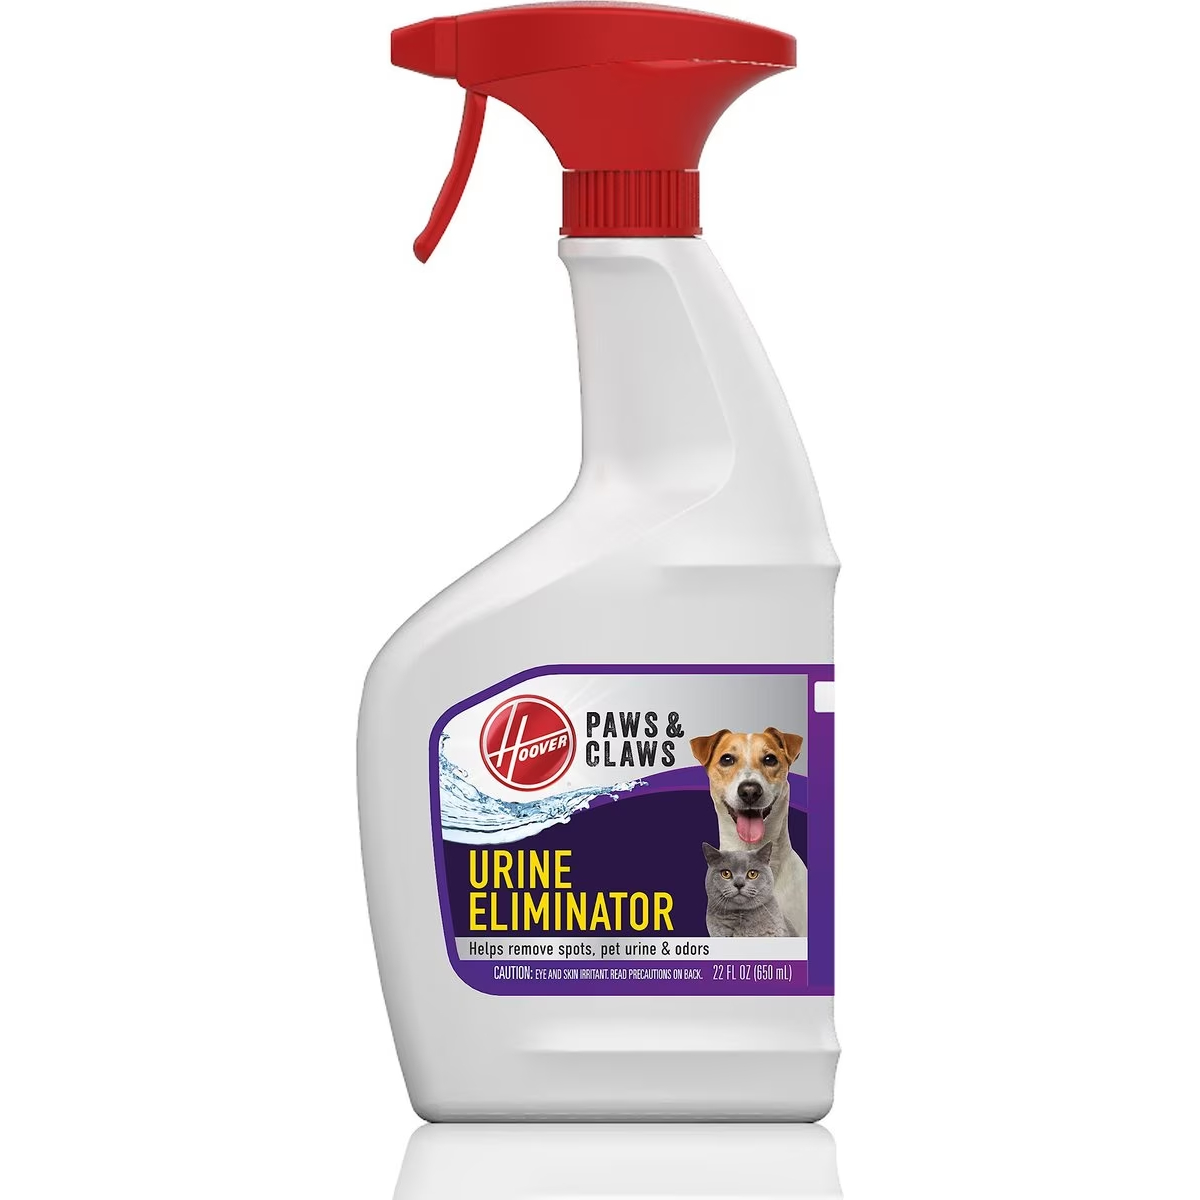 Hoover Paws & Claws Pet Urine Eliminator